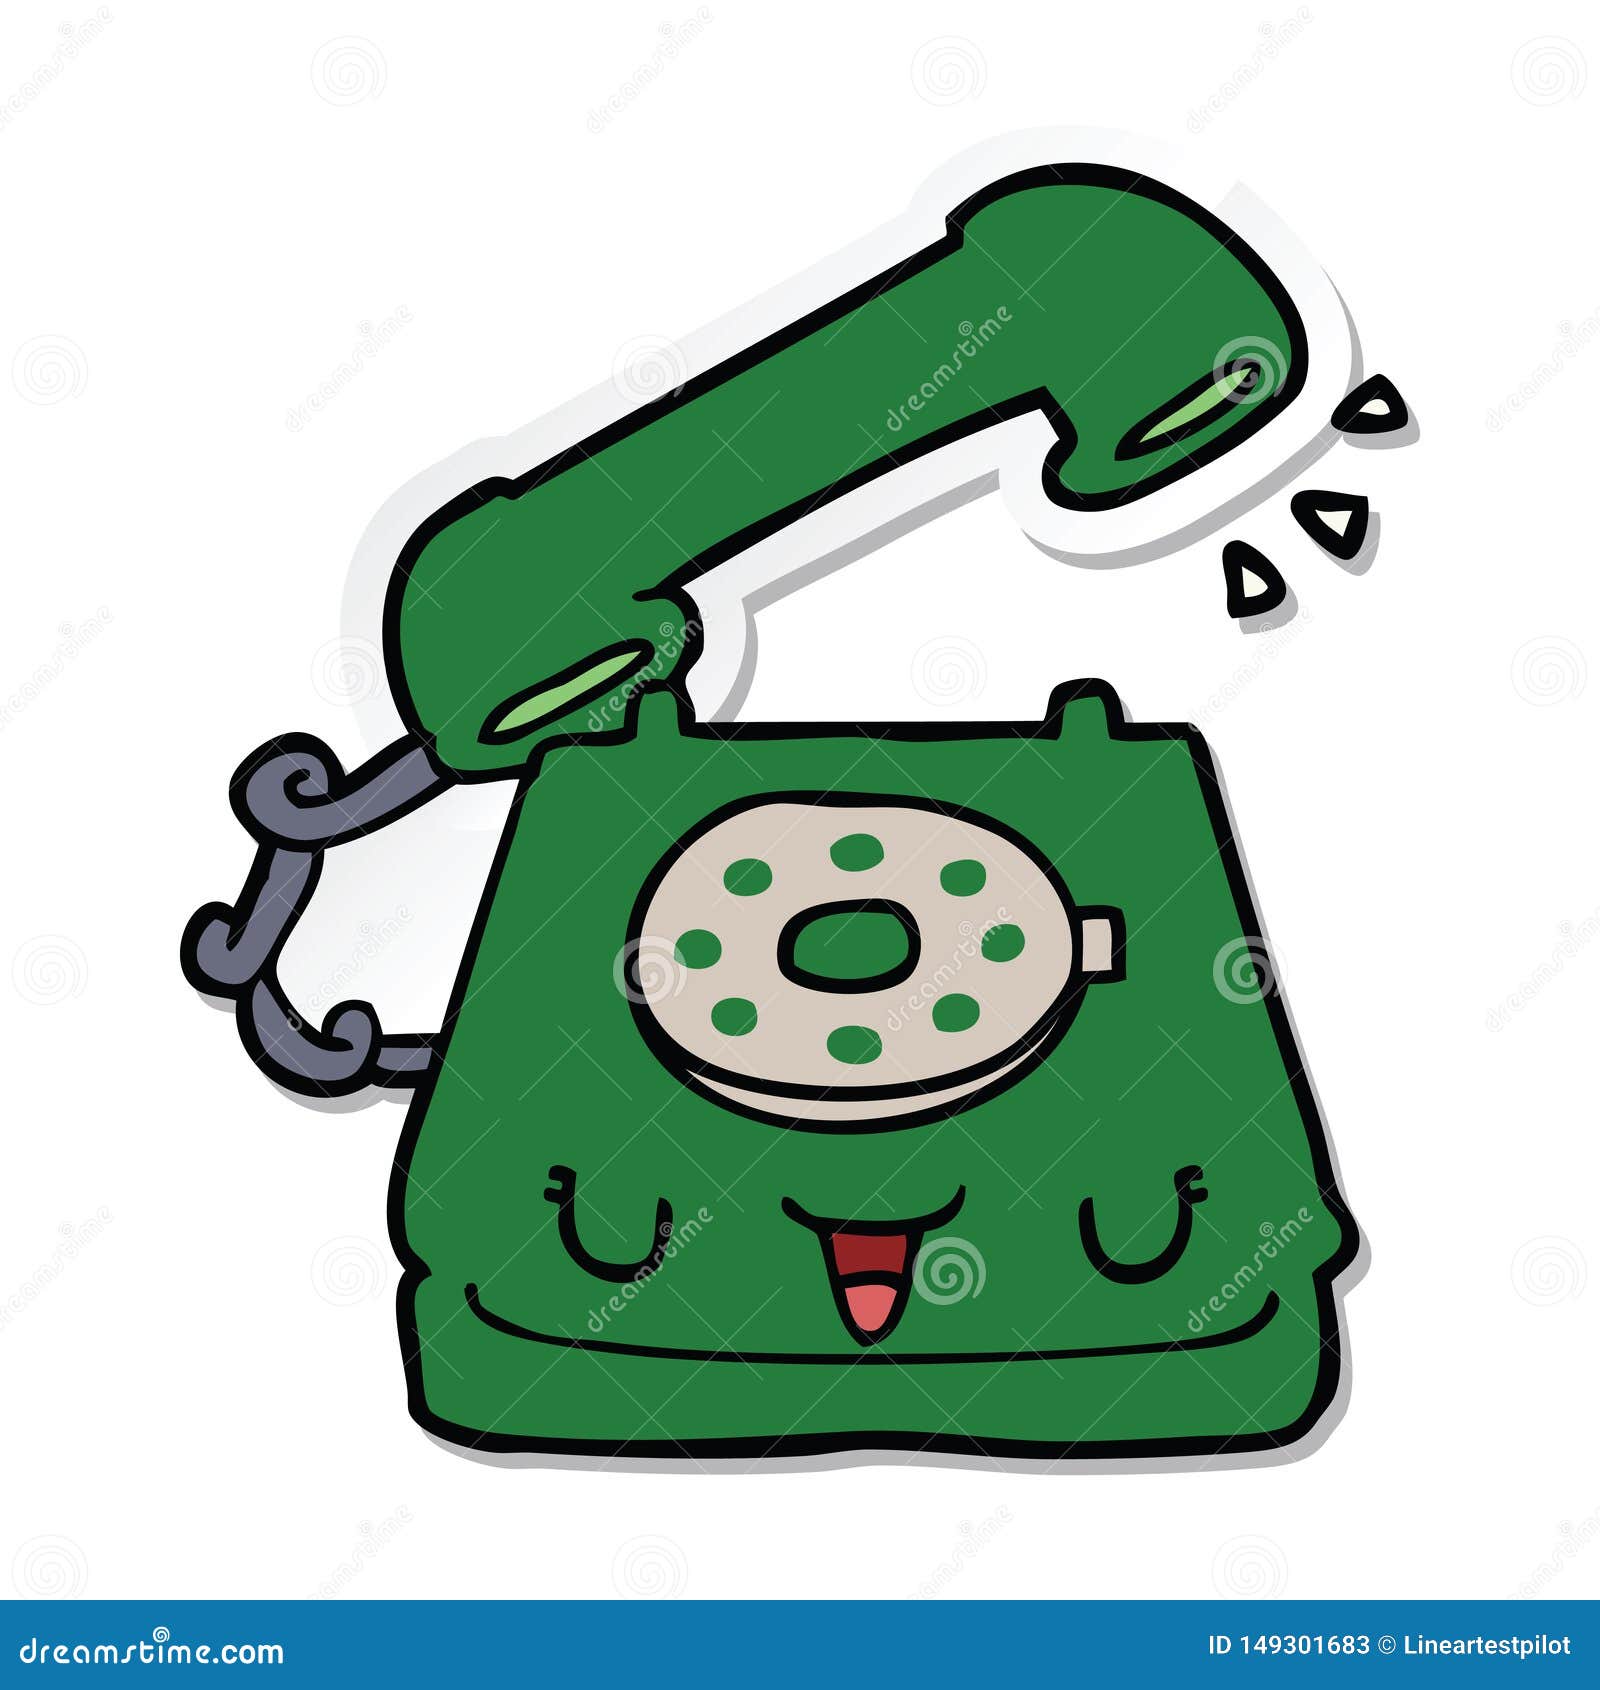 Sticker of a Cute Cartoon Telephone Stock Vector - Illustration of drawing,  phone: 149301683